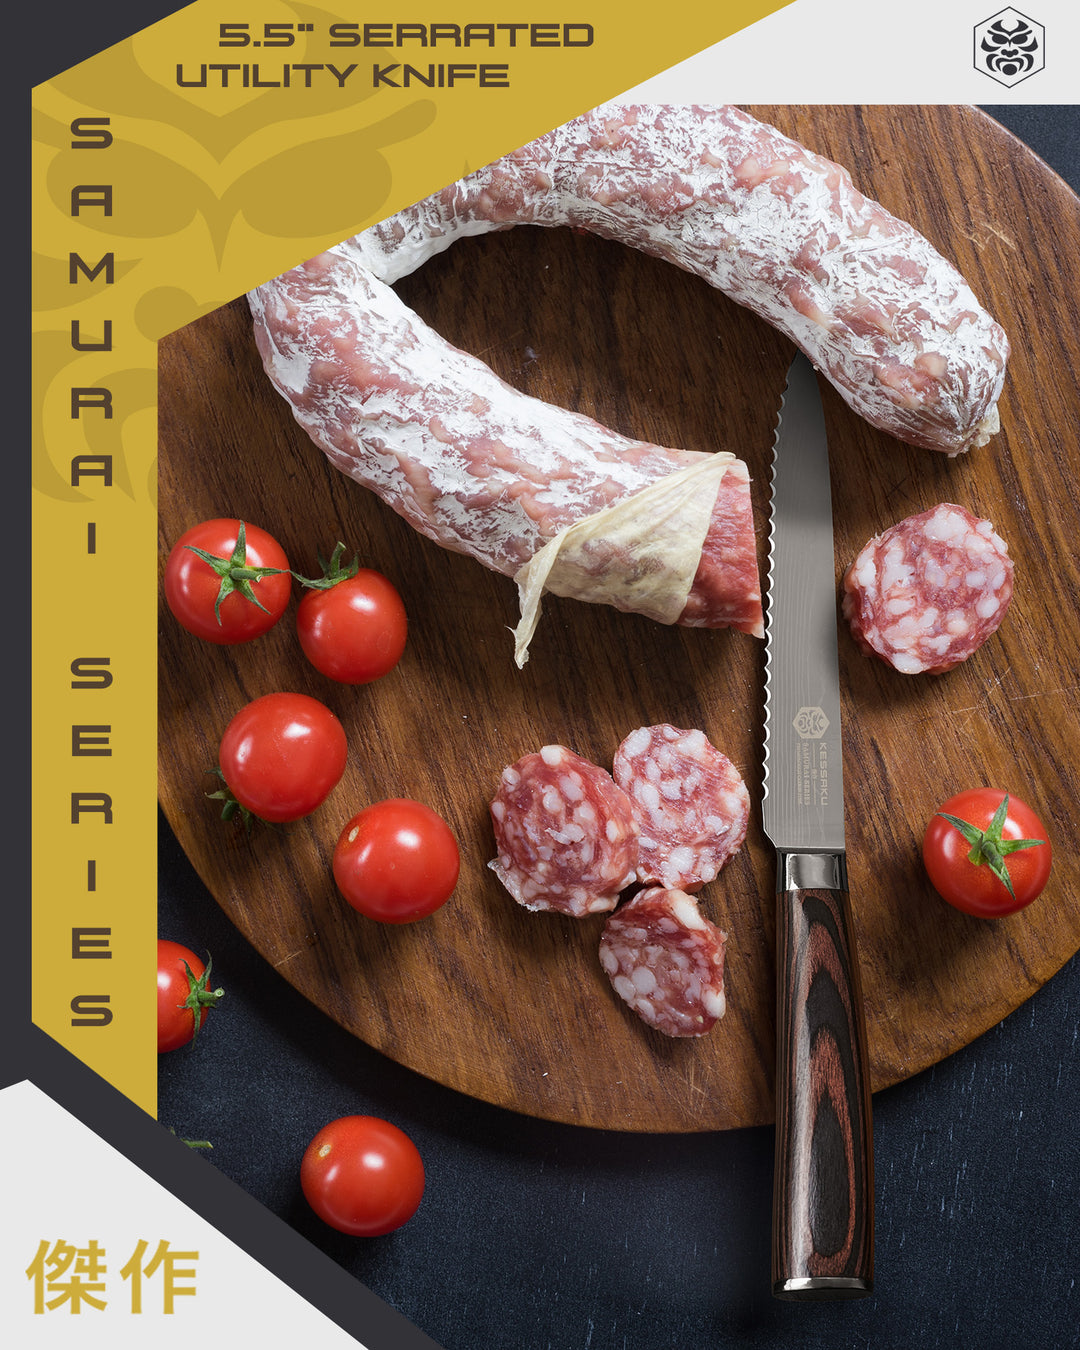 Cured meats, cherry tomatoes, and the Samurai Serrated Utility Knife on a cutting board